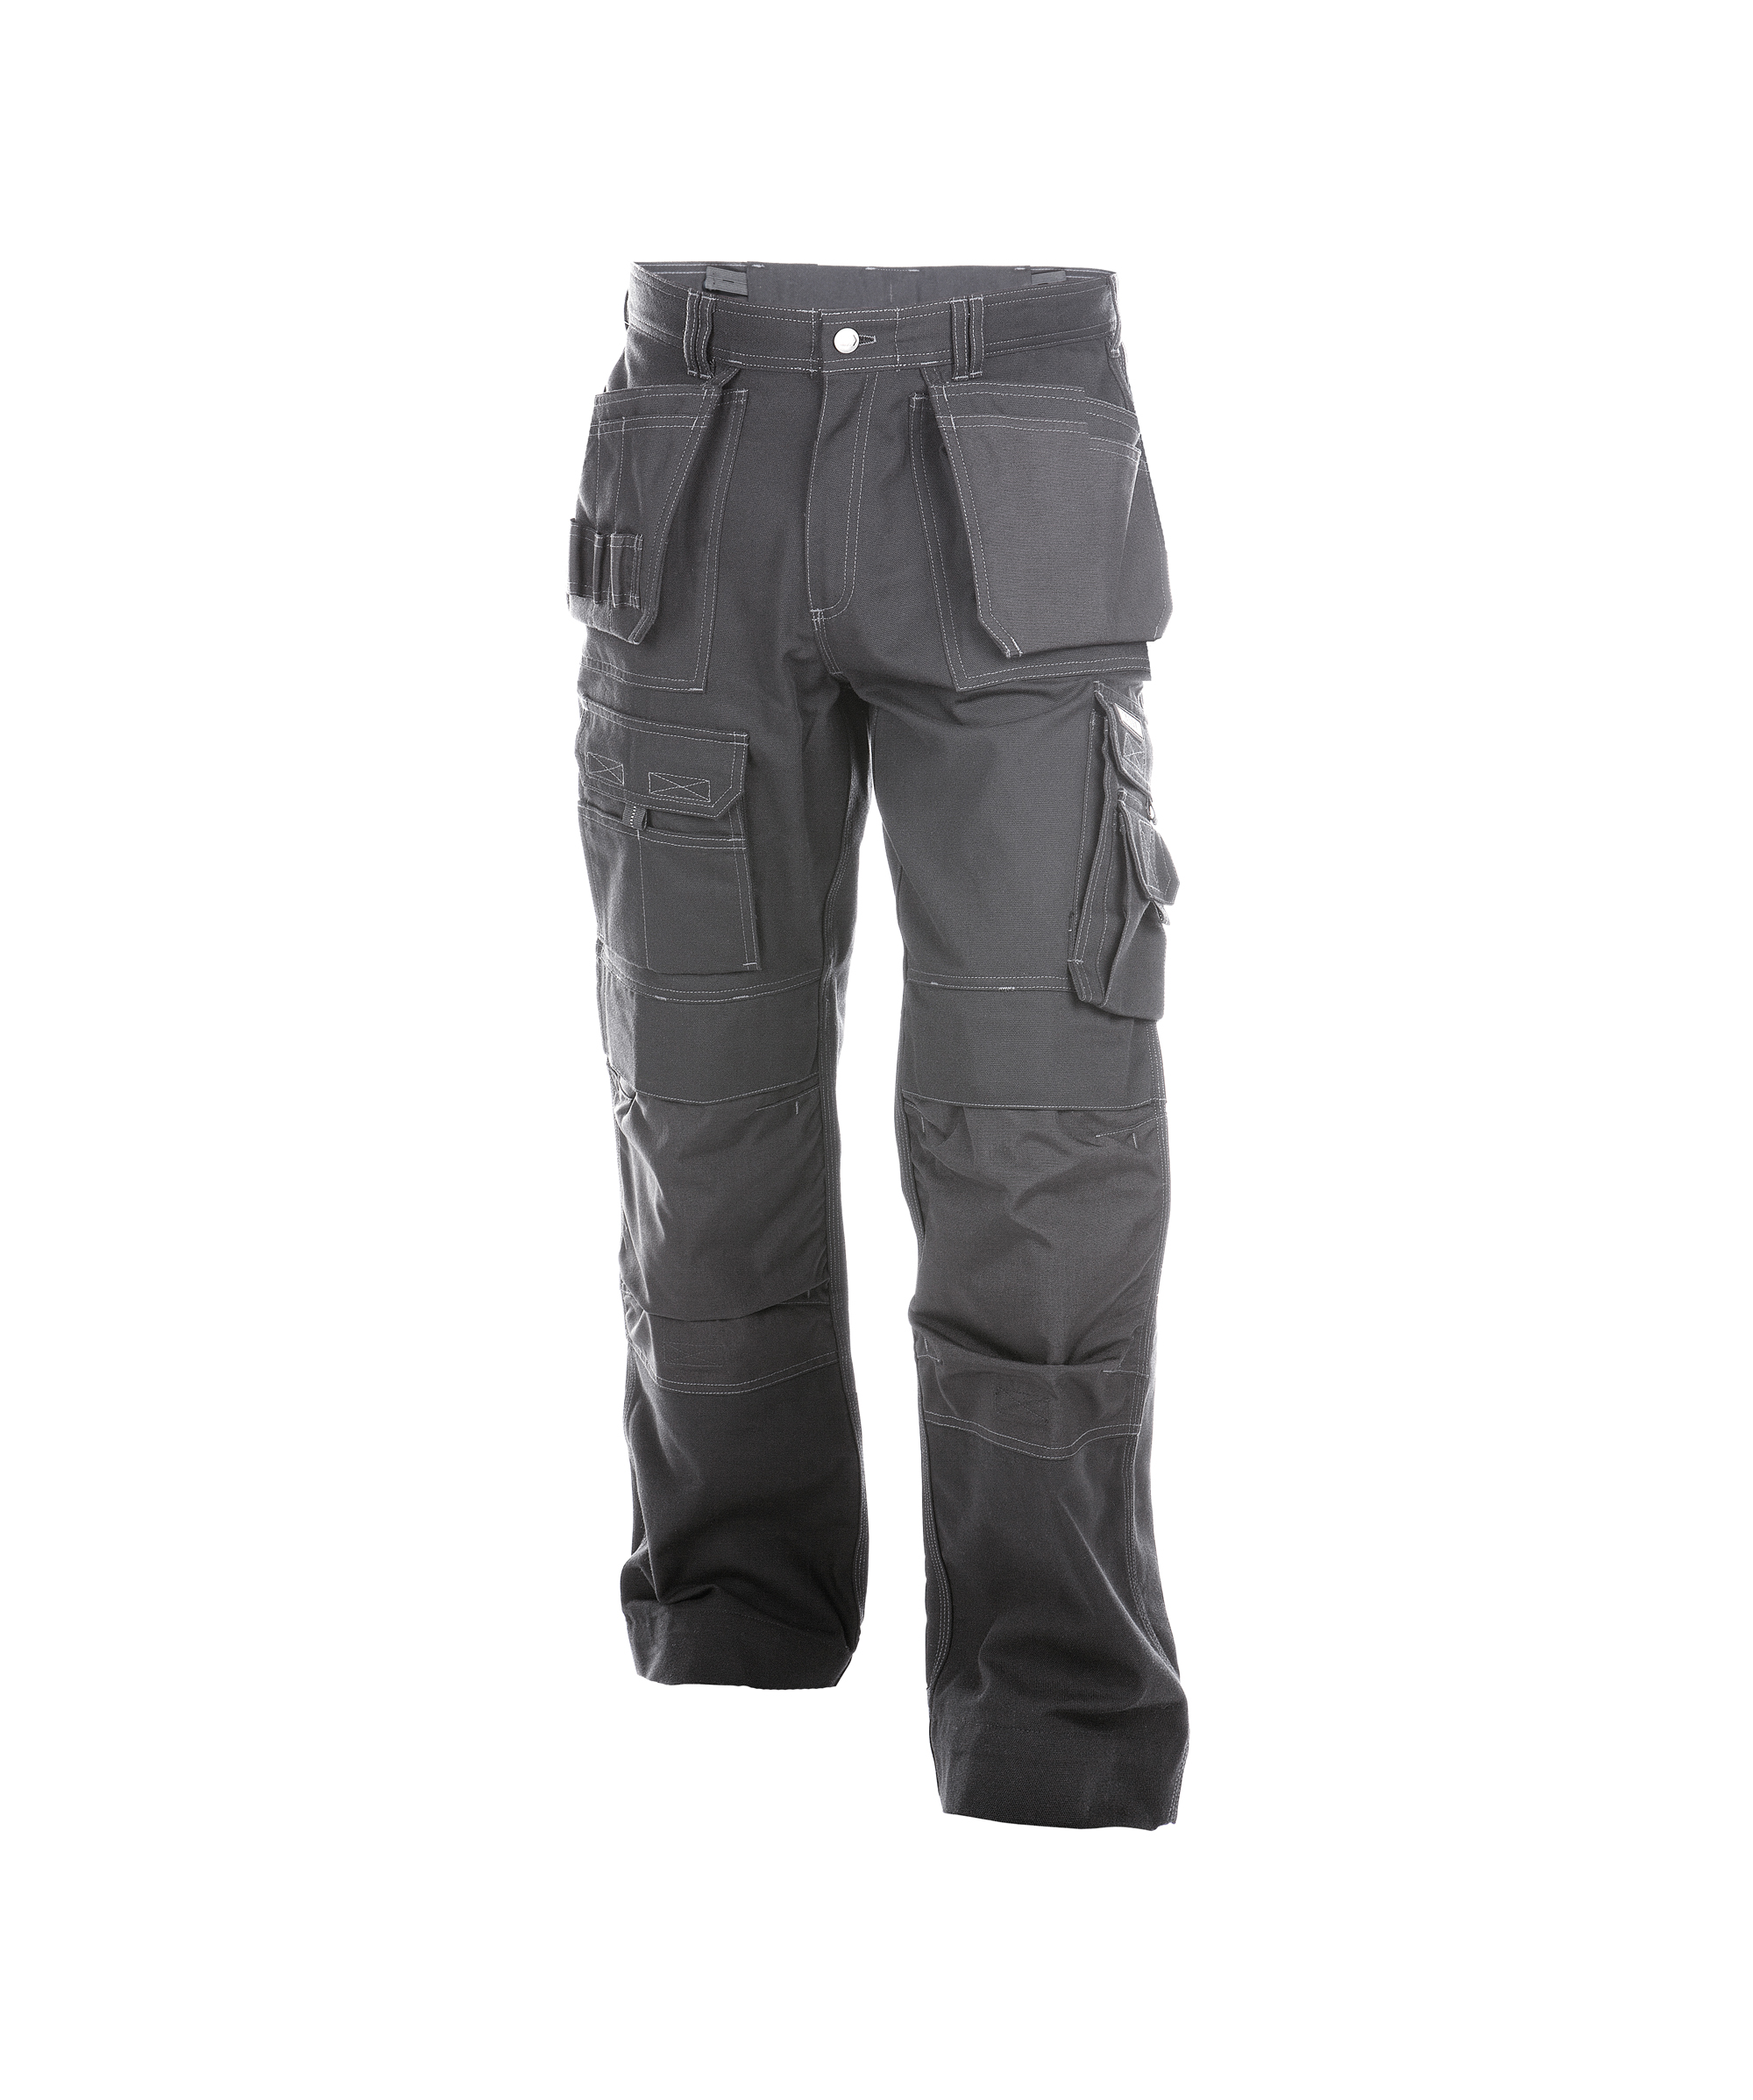 texas_canvas-work-trousers-with-multi-pockets-and-knee-pockets_cement-grey_front.jpg